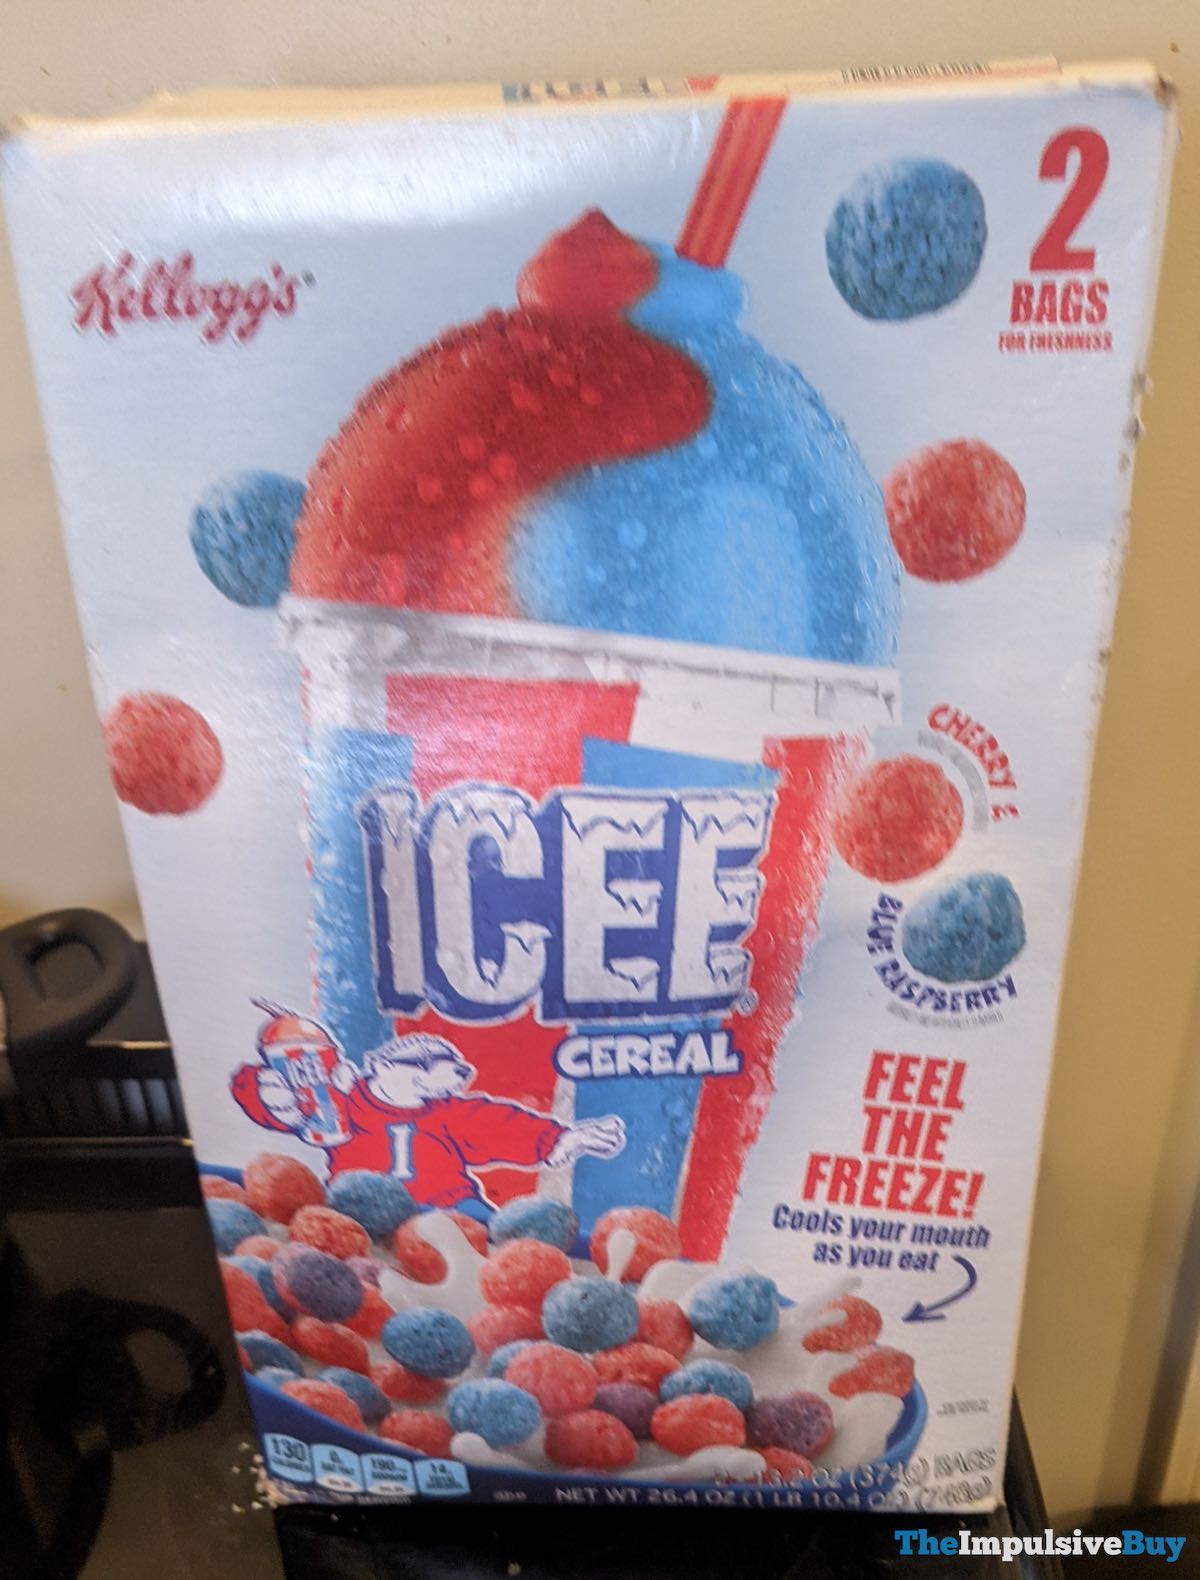 Spotted Kelloggs Icee Cereal The Impulsive Buy 8379